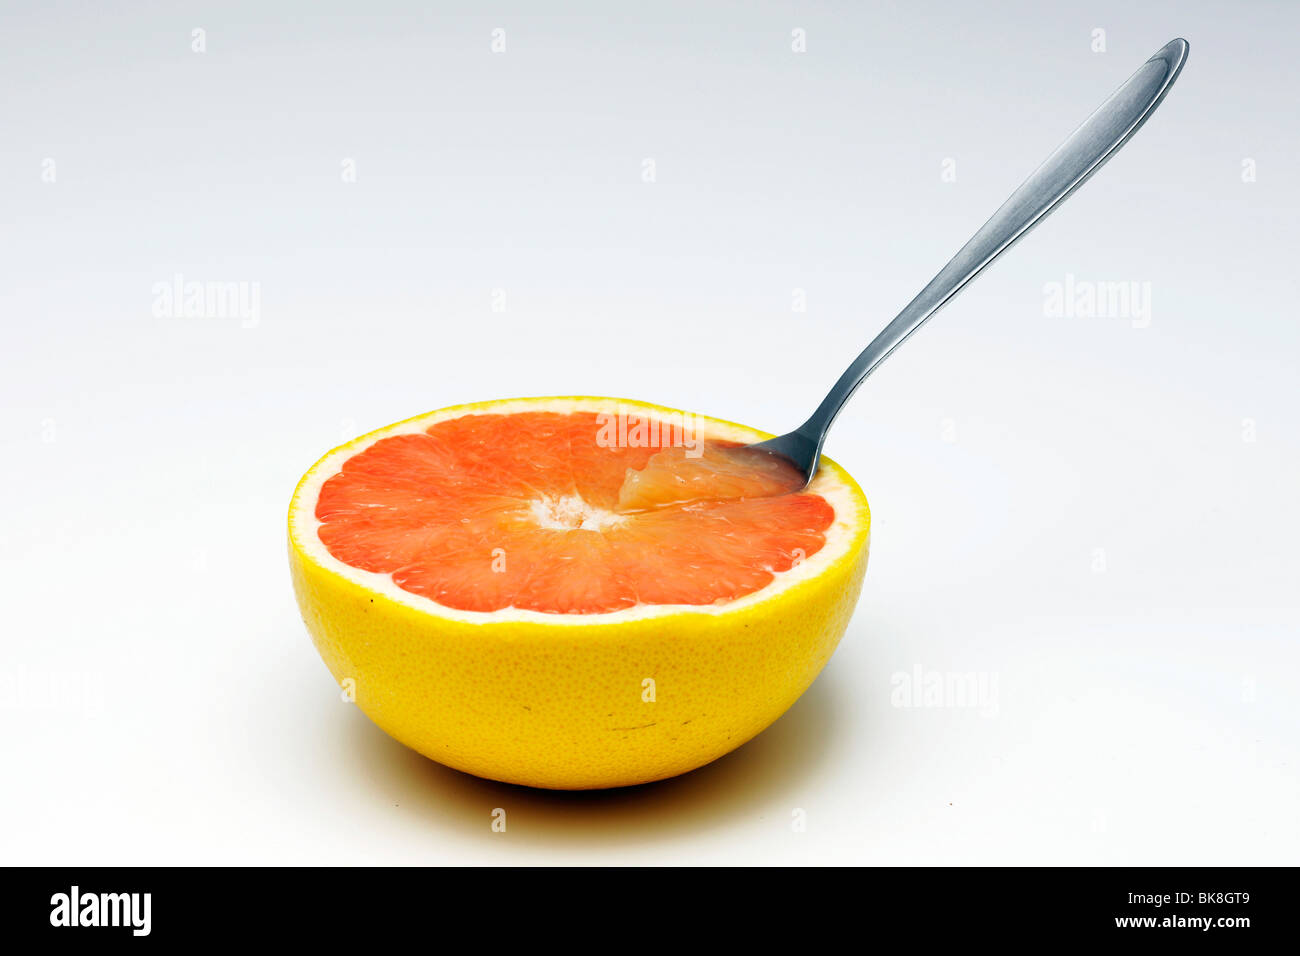 Sliced red grapefruit (Citrus paradisi) and a spoon Stock Photo